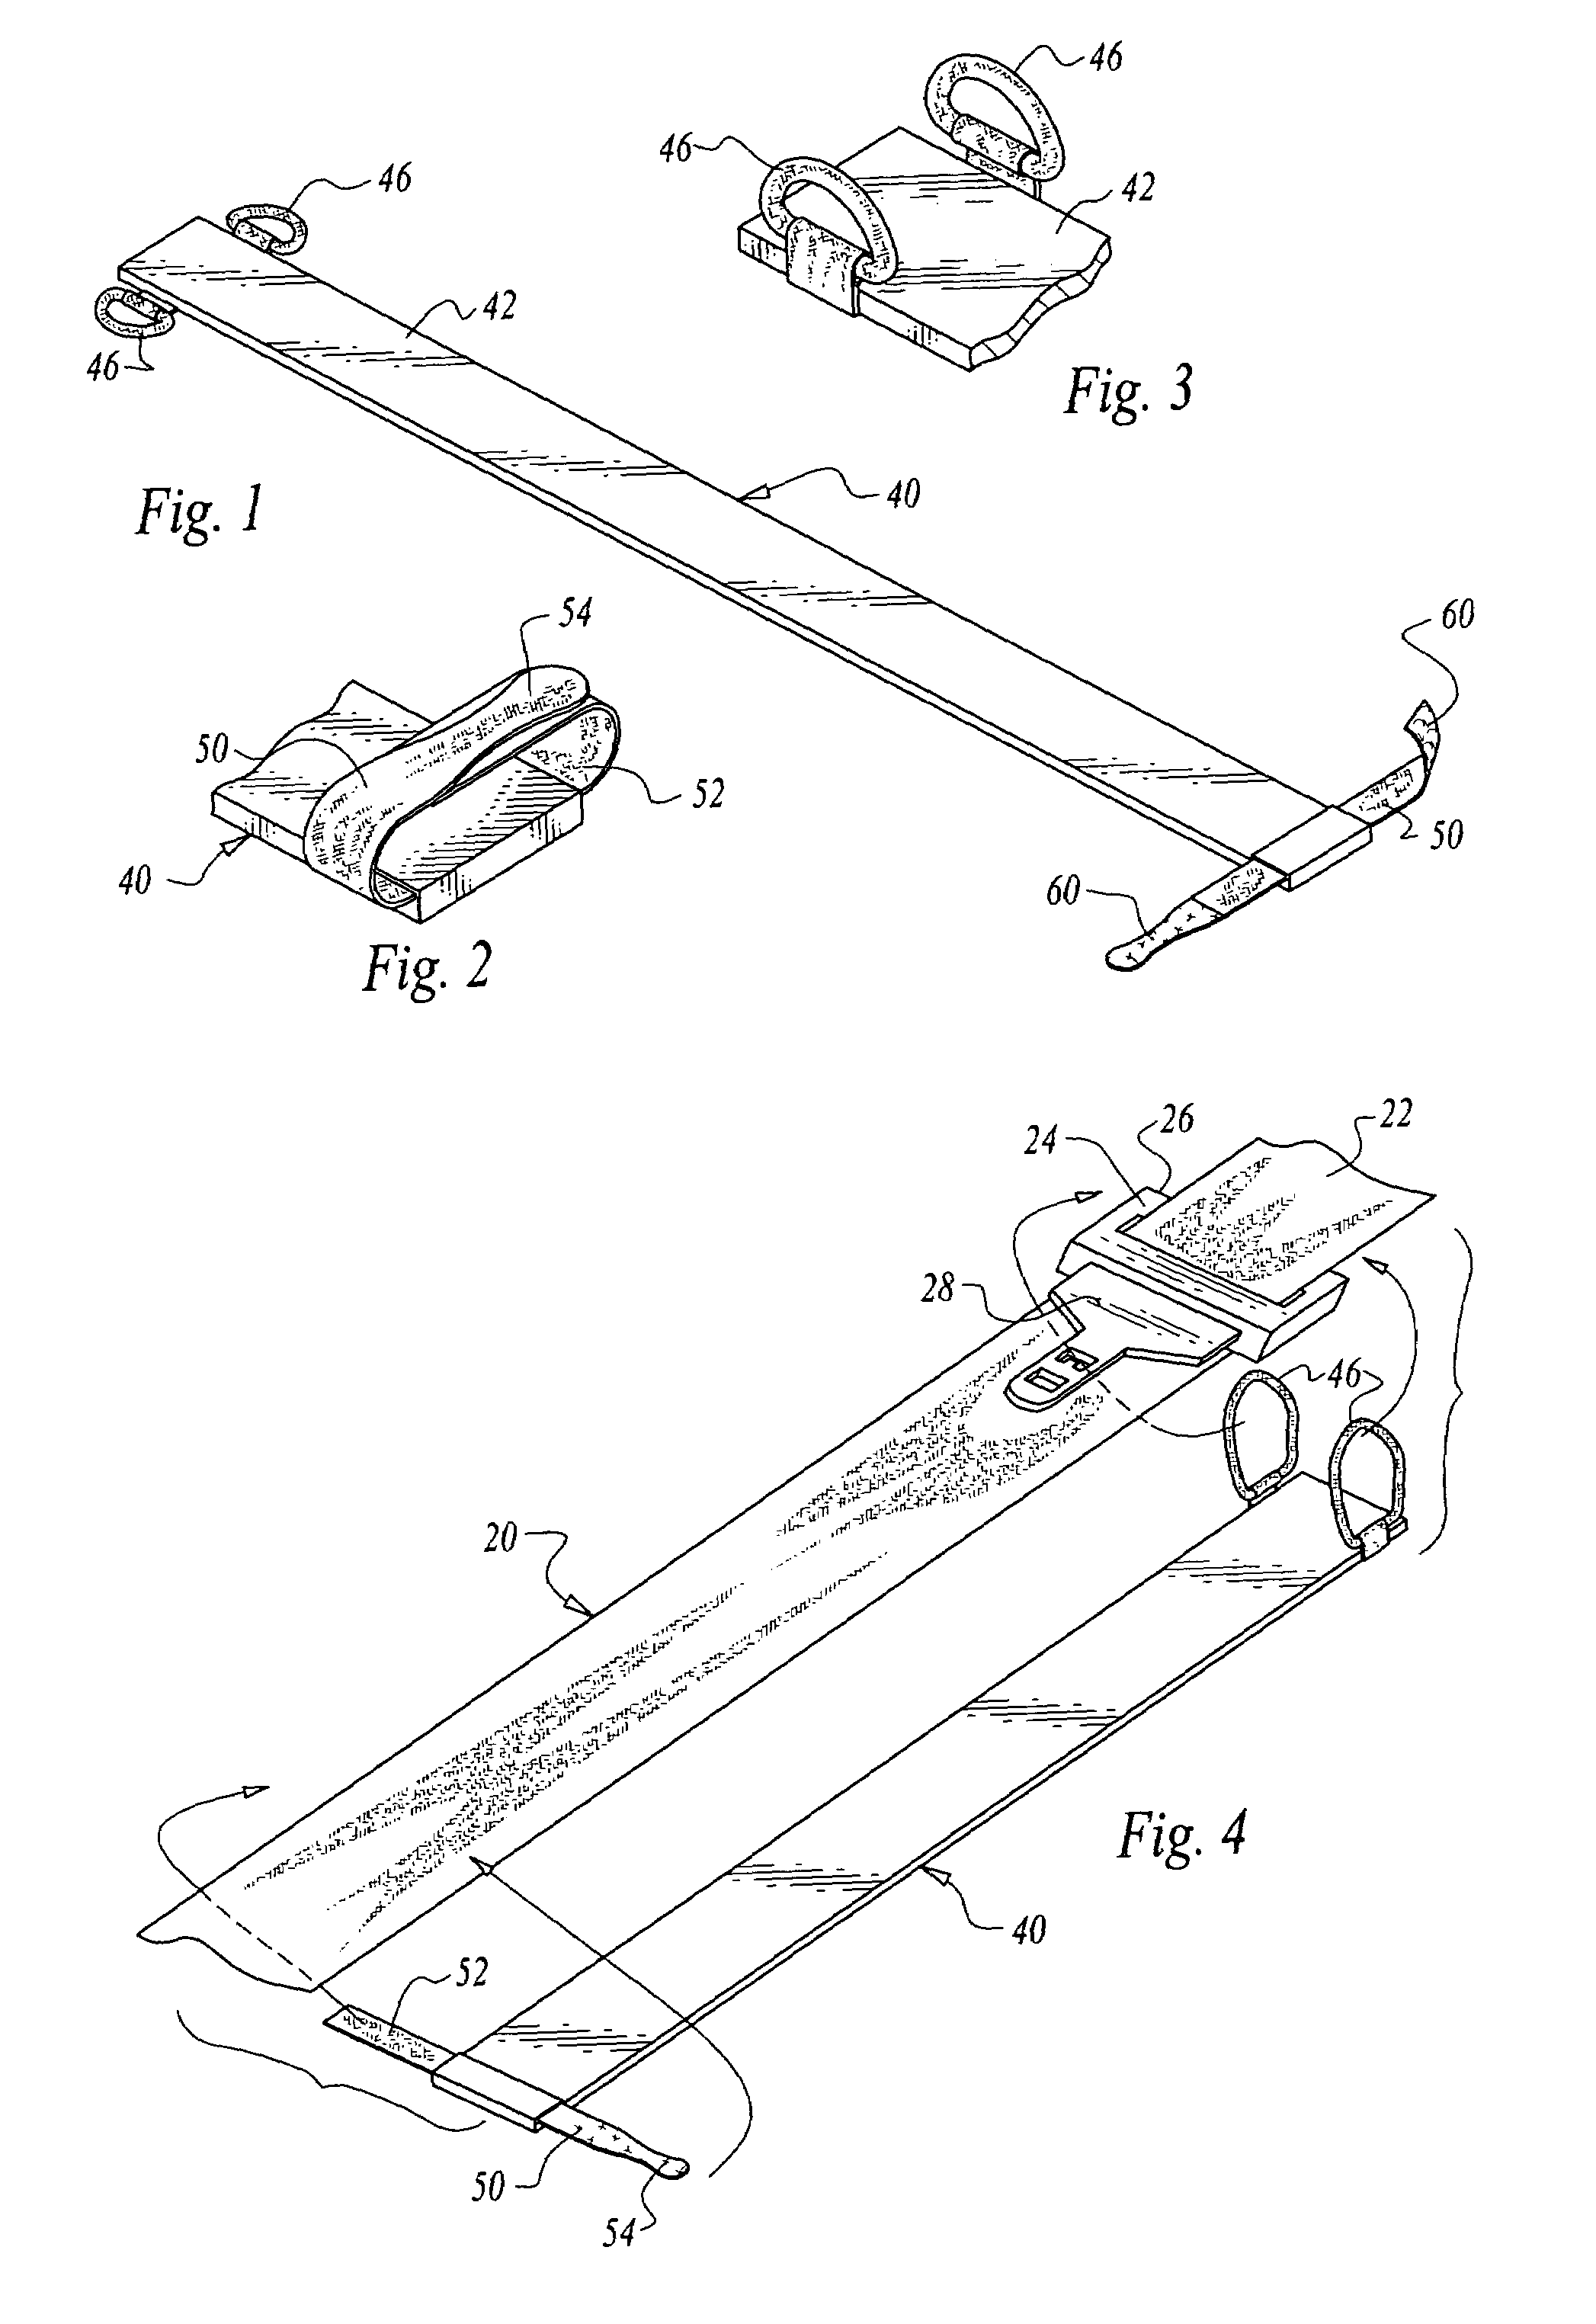 System for facilitating threading of a seat belt through a child safety seat